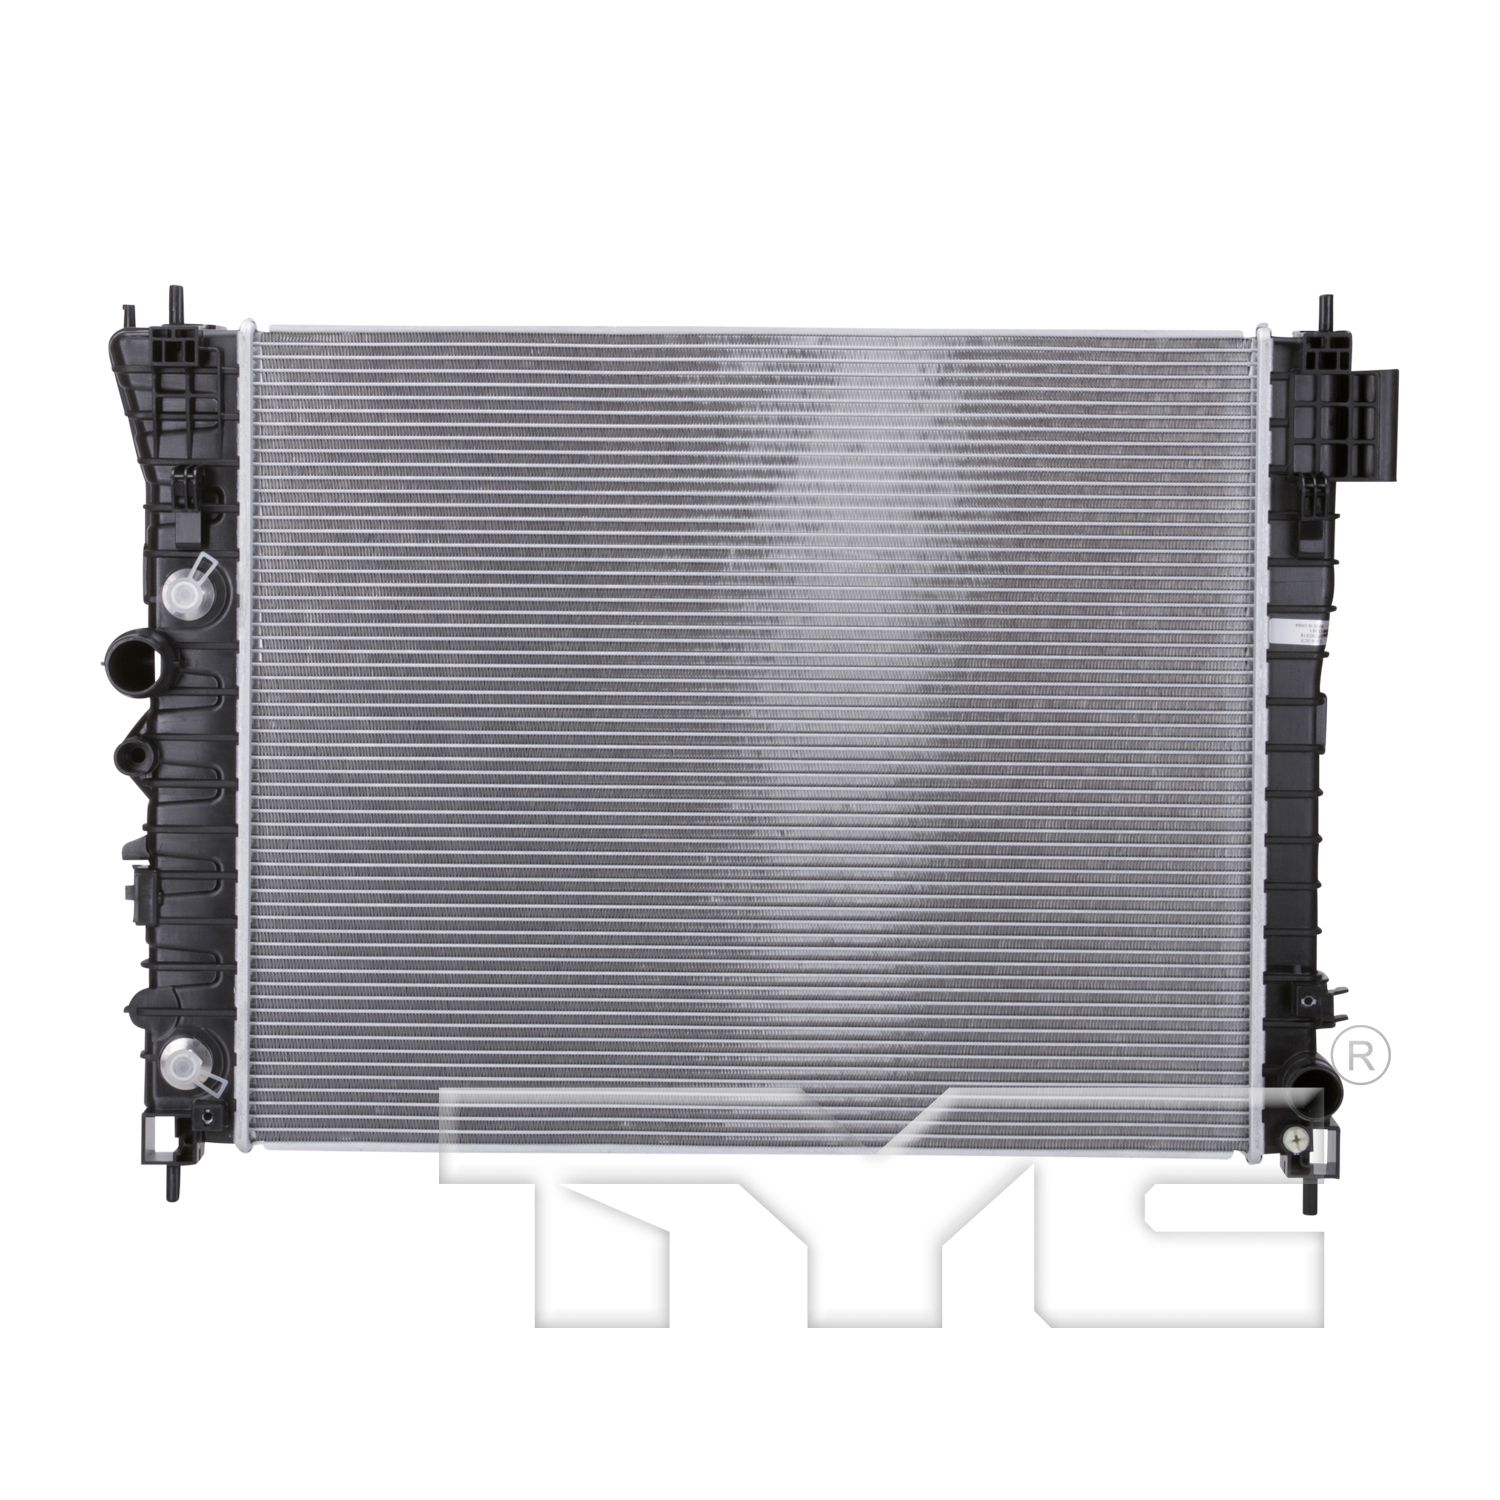 Aftermarket RADIATORS for BUICK - ENCORE, ENCORE,13-21,Radiator assembly